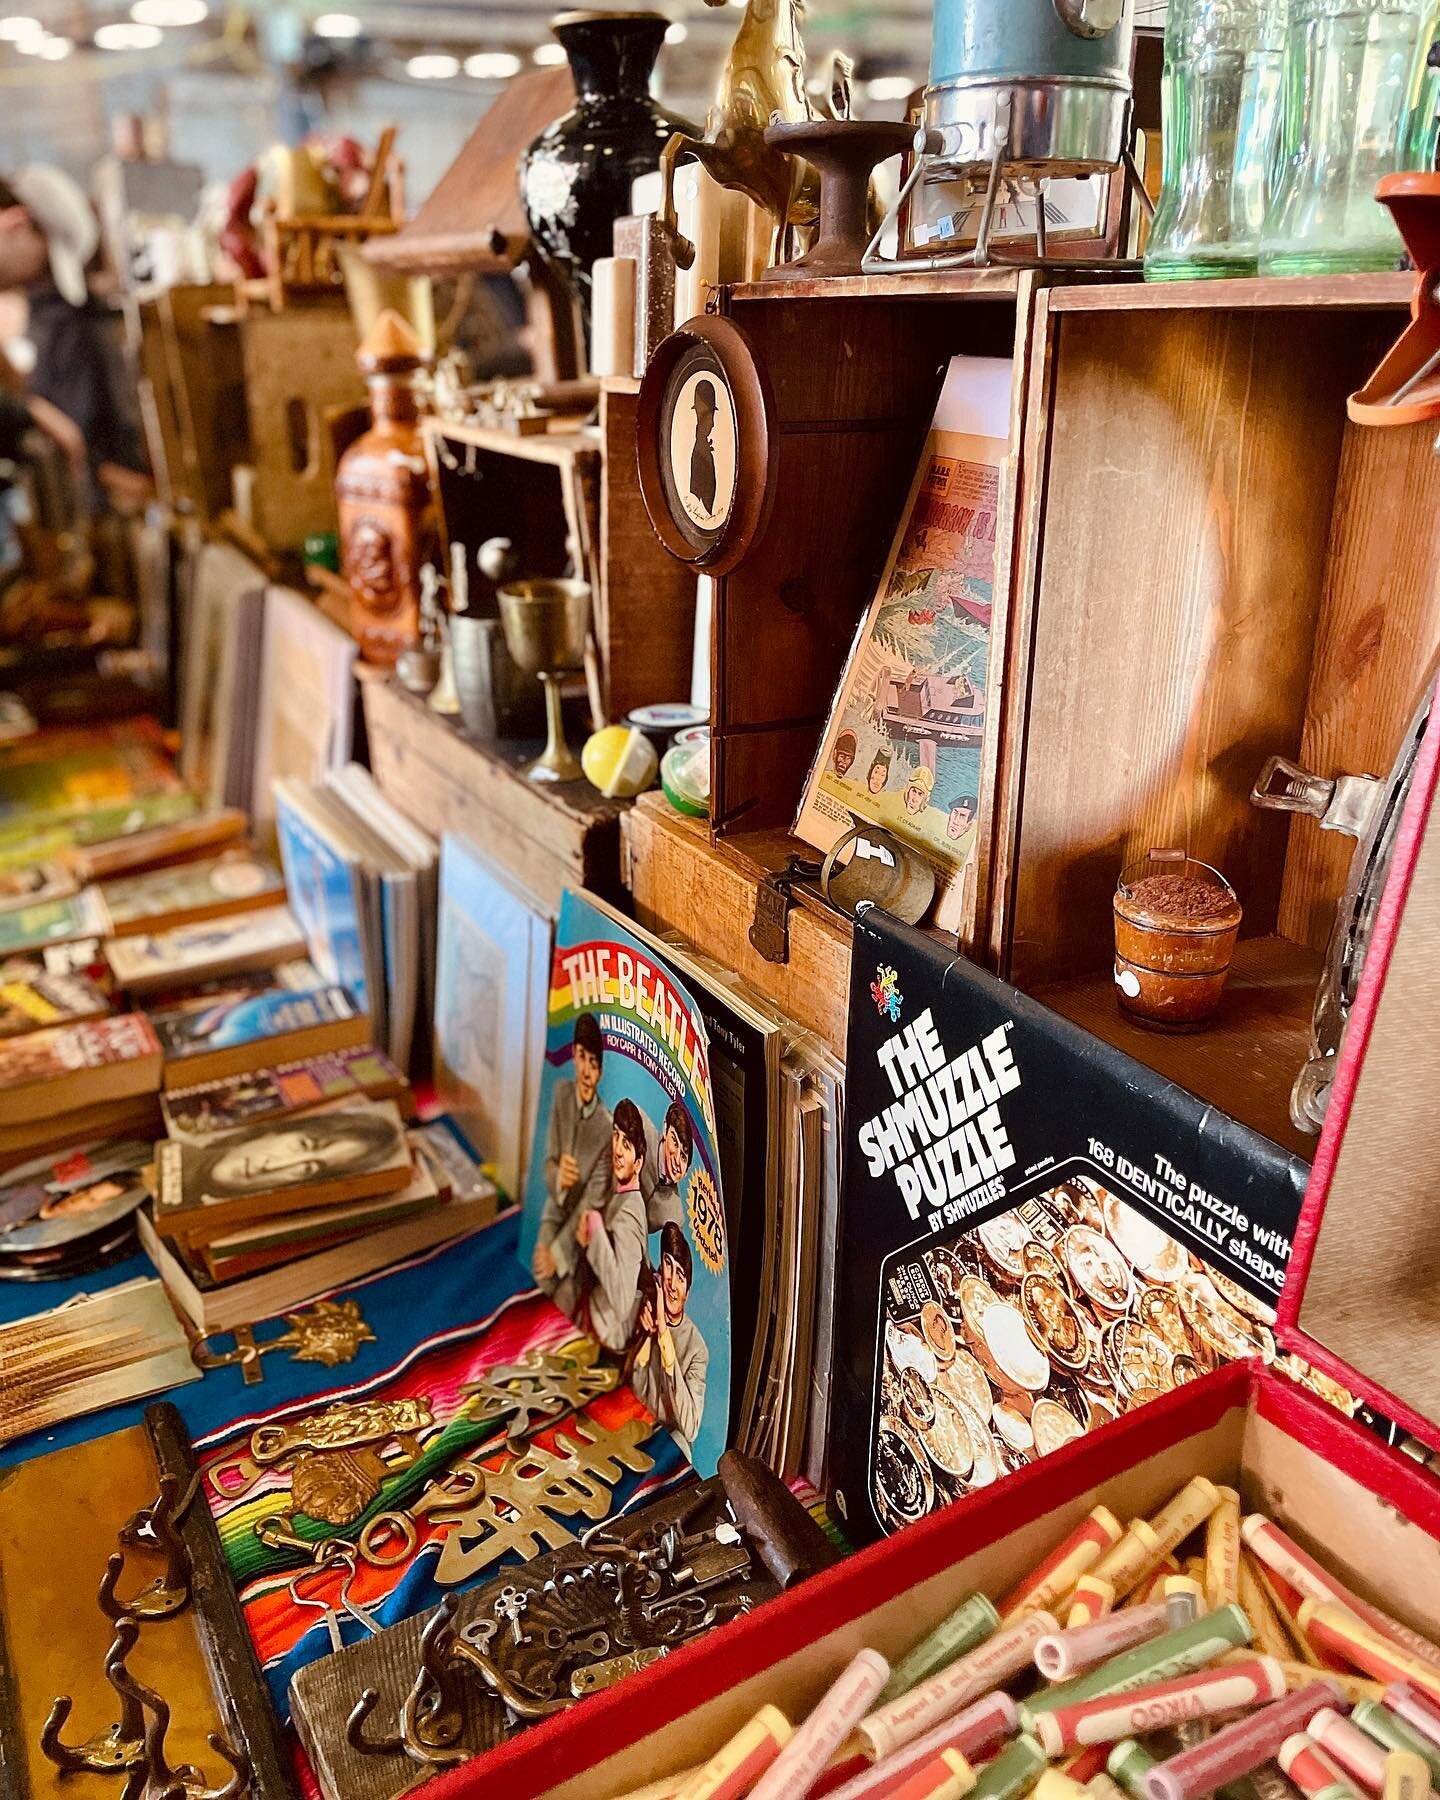 A peek at the treasures that have came and gone through the wooden crates of the Brooklyn Flea ✨
.
 #thriftstorefinds #dumbobrooklyn #ecofriendlyfashion #Brooklyn #nyc #nycthingstodo #nycthrift #nycfun